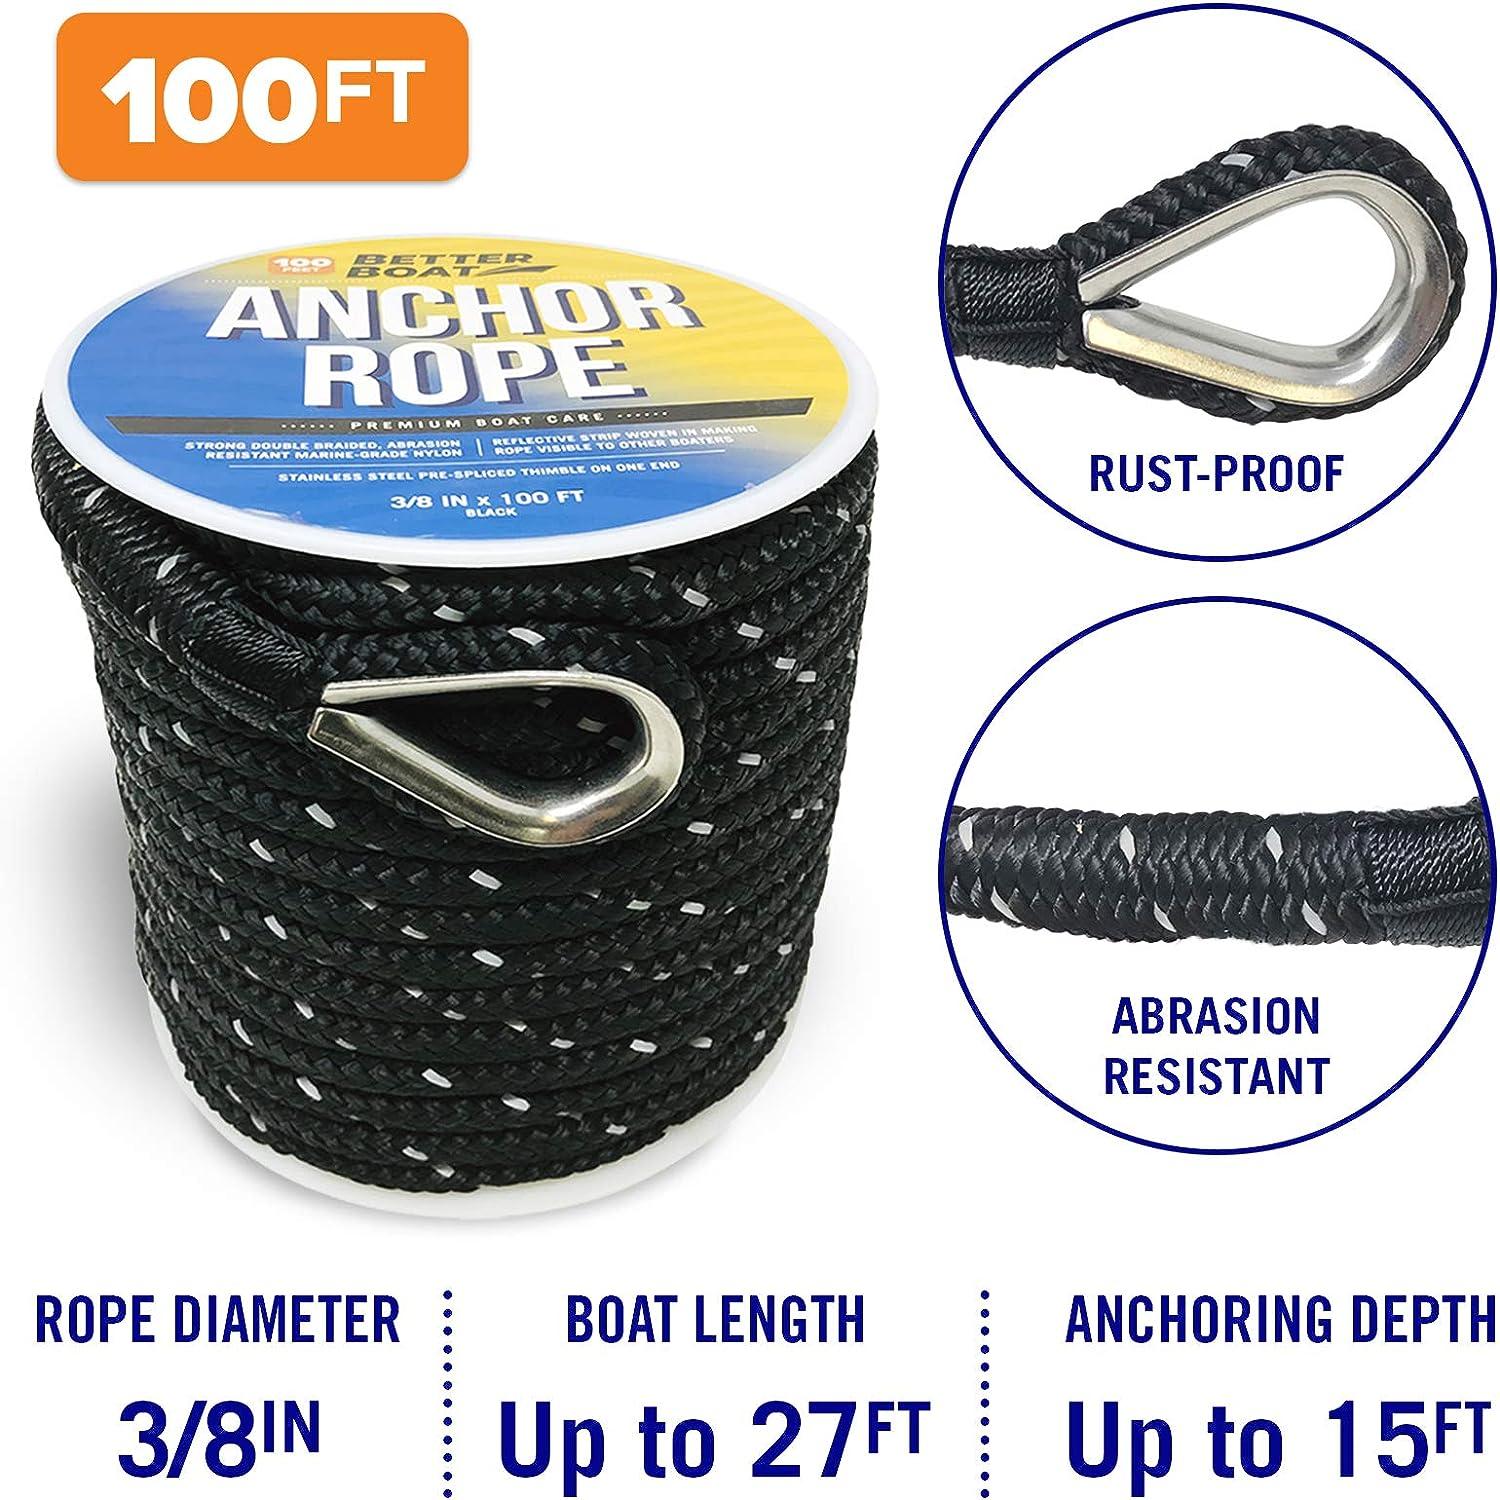 Premium Boat Anchor Rope 100 Ft Double Braided Boat Anchor Line Blue Nylon Marine Rope Braided 3/8 Anchor Rope Reel for Many Anchors & Boats 3/8